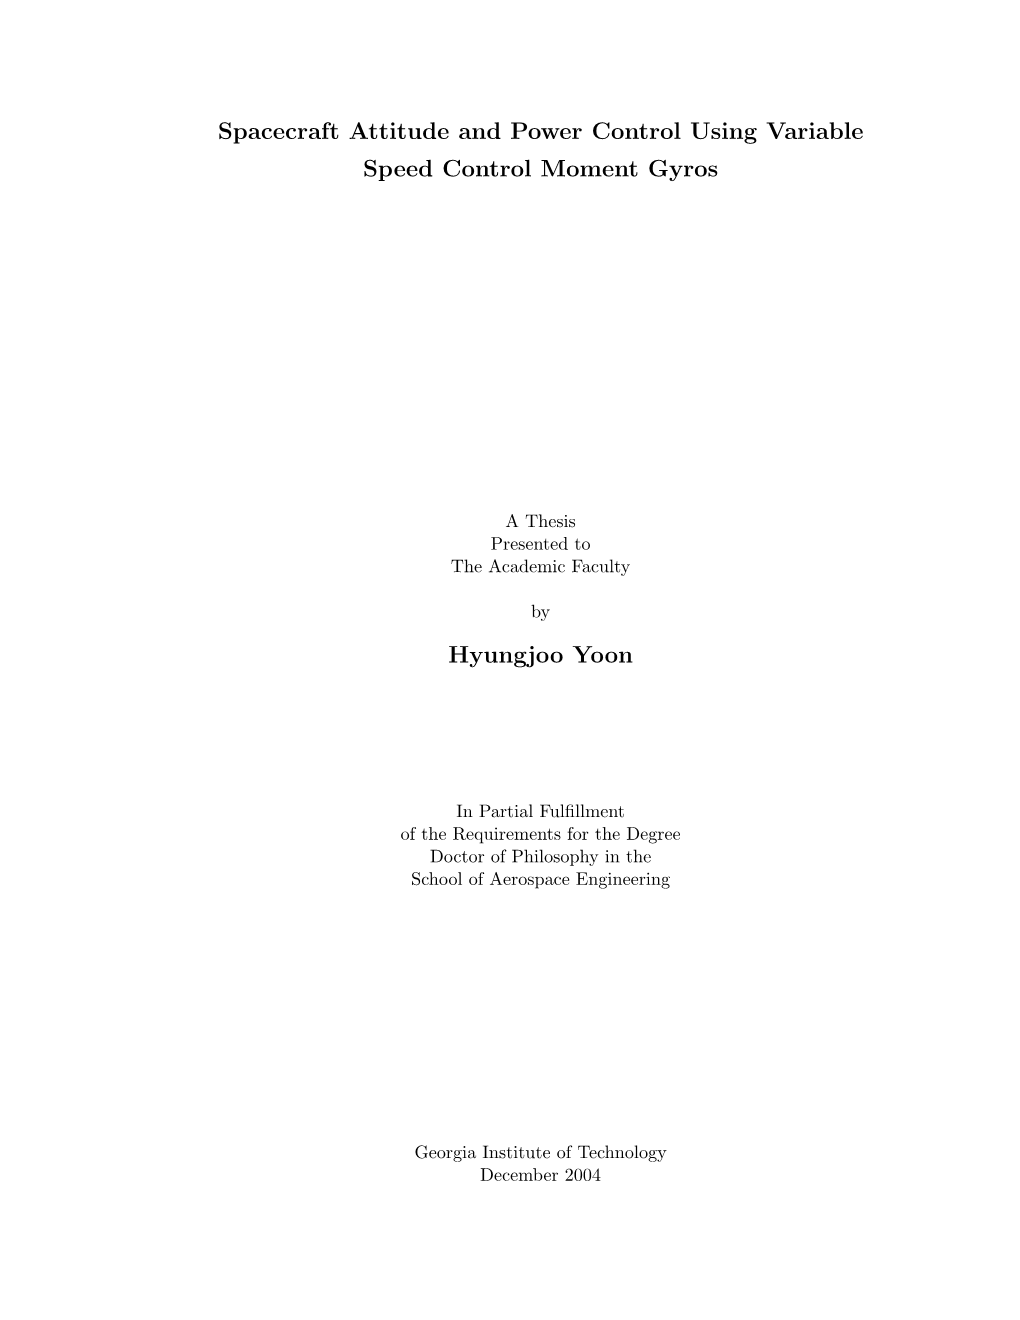 Spacecraft Attitude and Power Control Using Variable Speed Control Moment Gyros